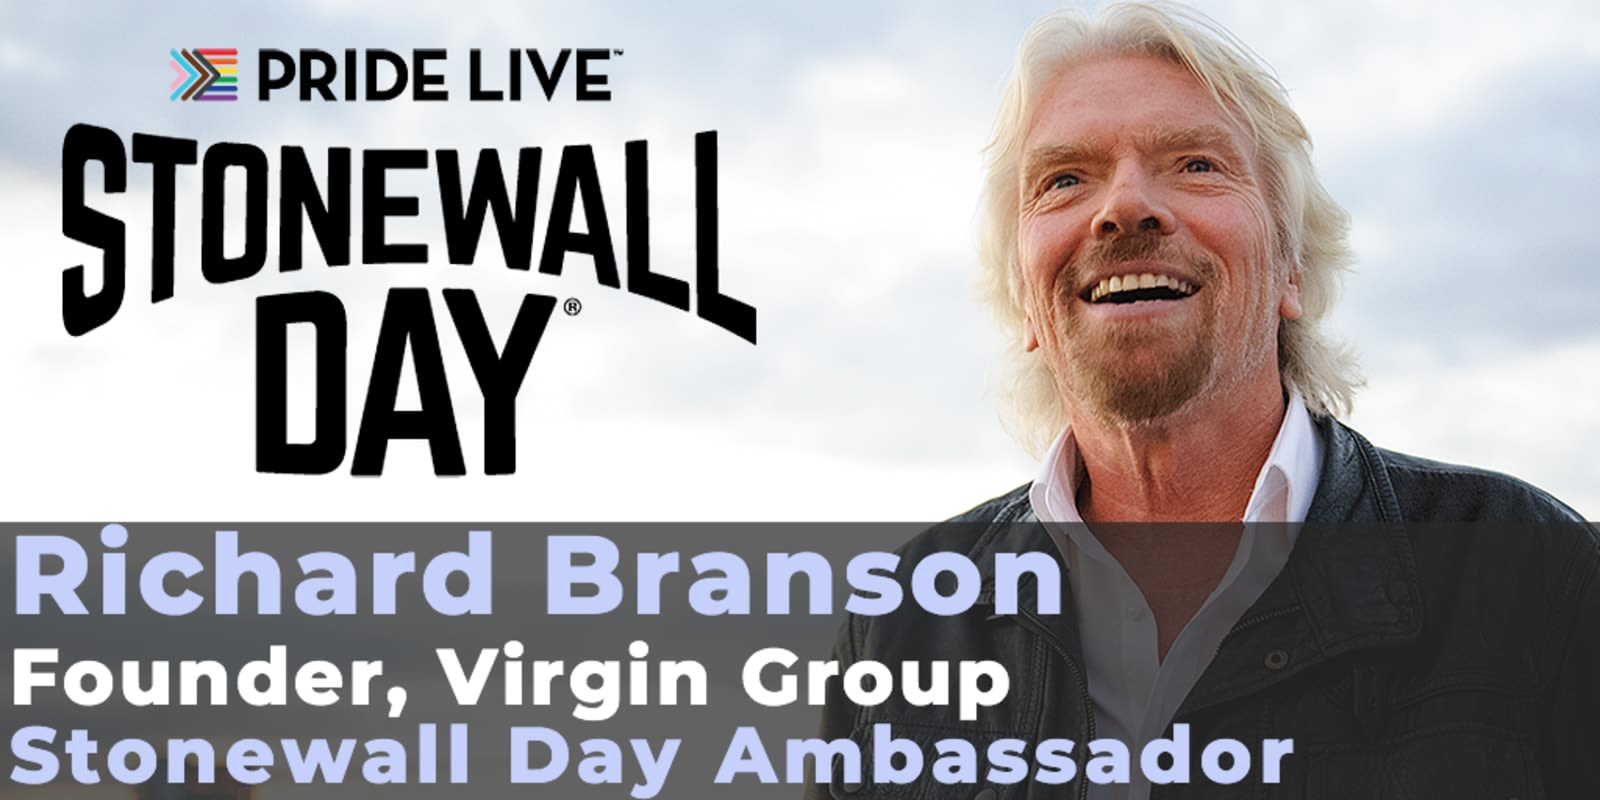 Richard Branson and Pride Live Stonewall Day event flyer